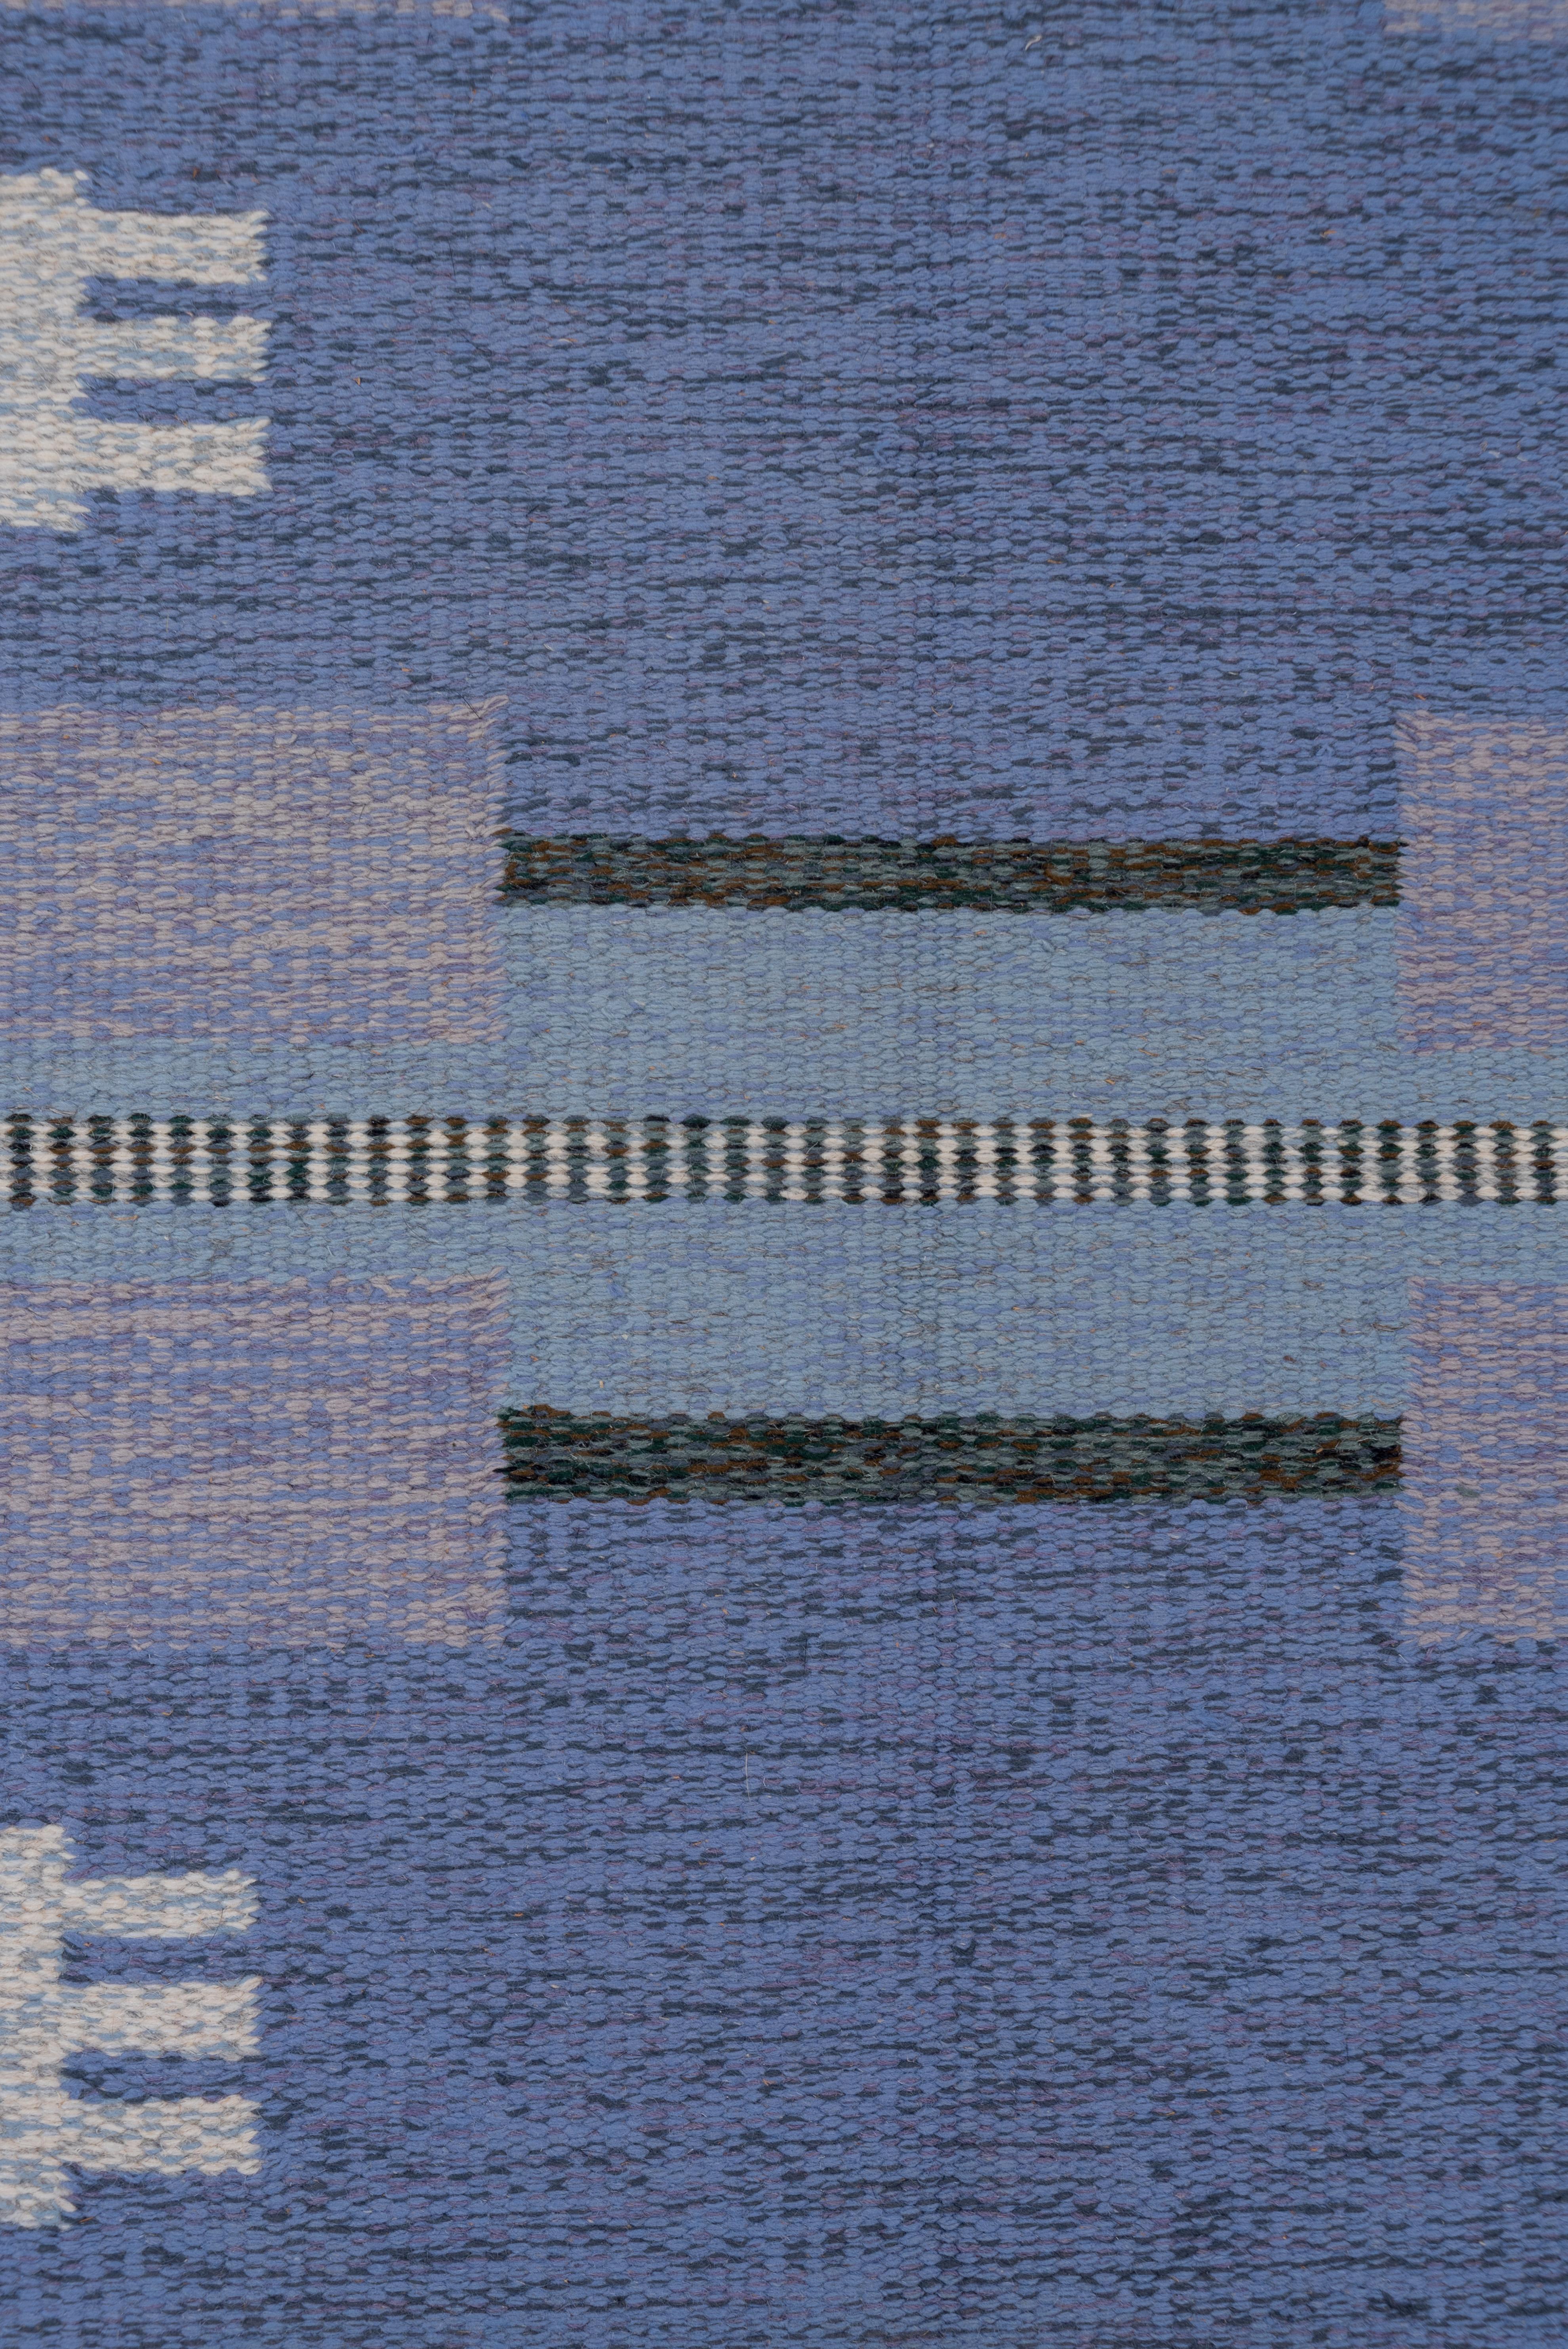 A vibrant field of striating blues n four broad horizontal bands against a lighter blue background. Charcoal gray border with added rectangles and partial lines. Cream stepped devices with triple extenders. Blue end strips and finishing braided